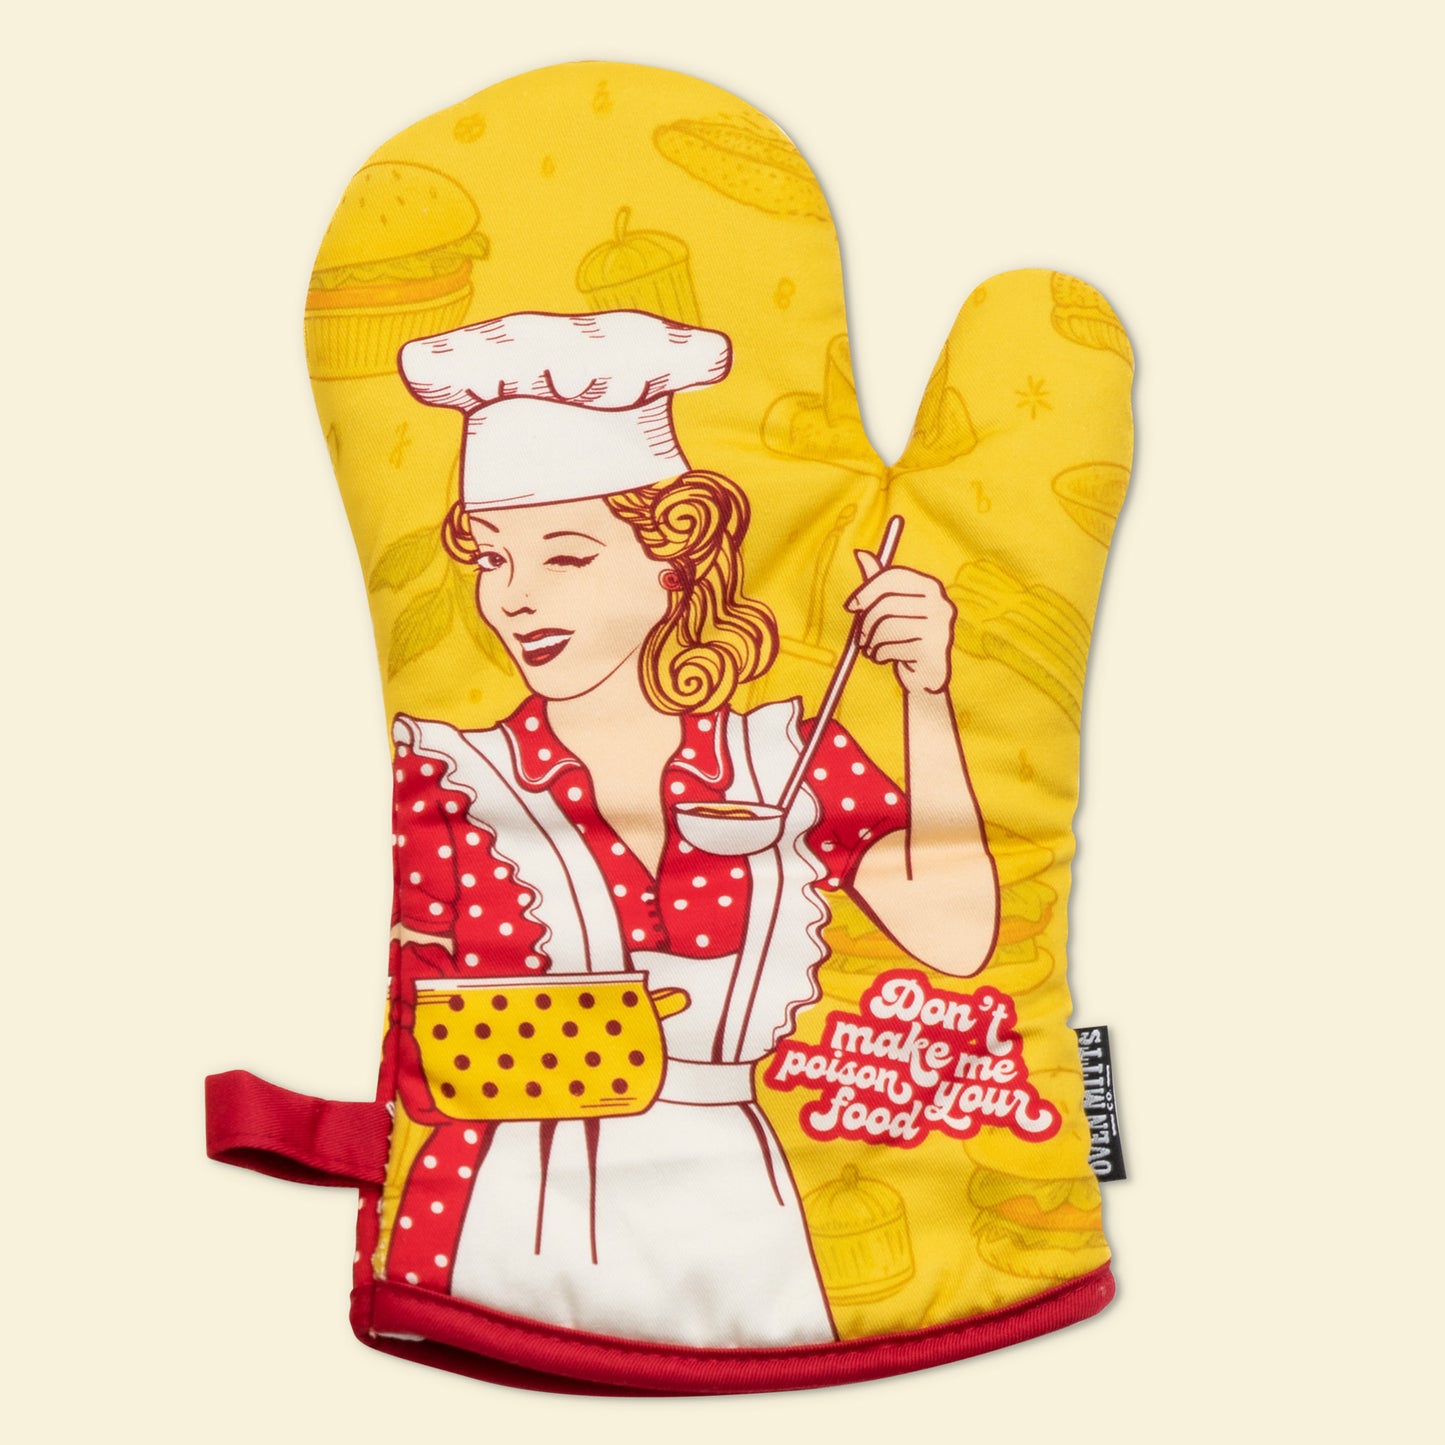 Don't Make Me Poison Your Food Oven Mitts left glove premium